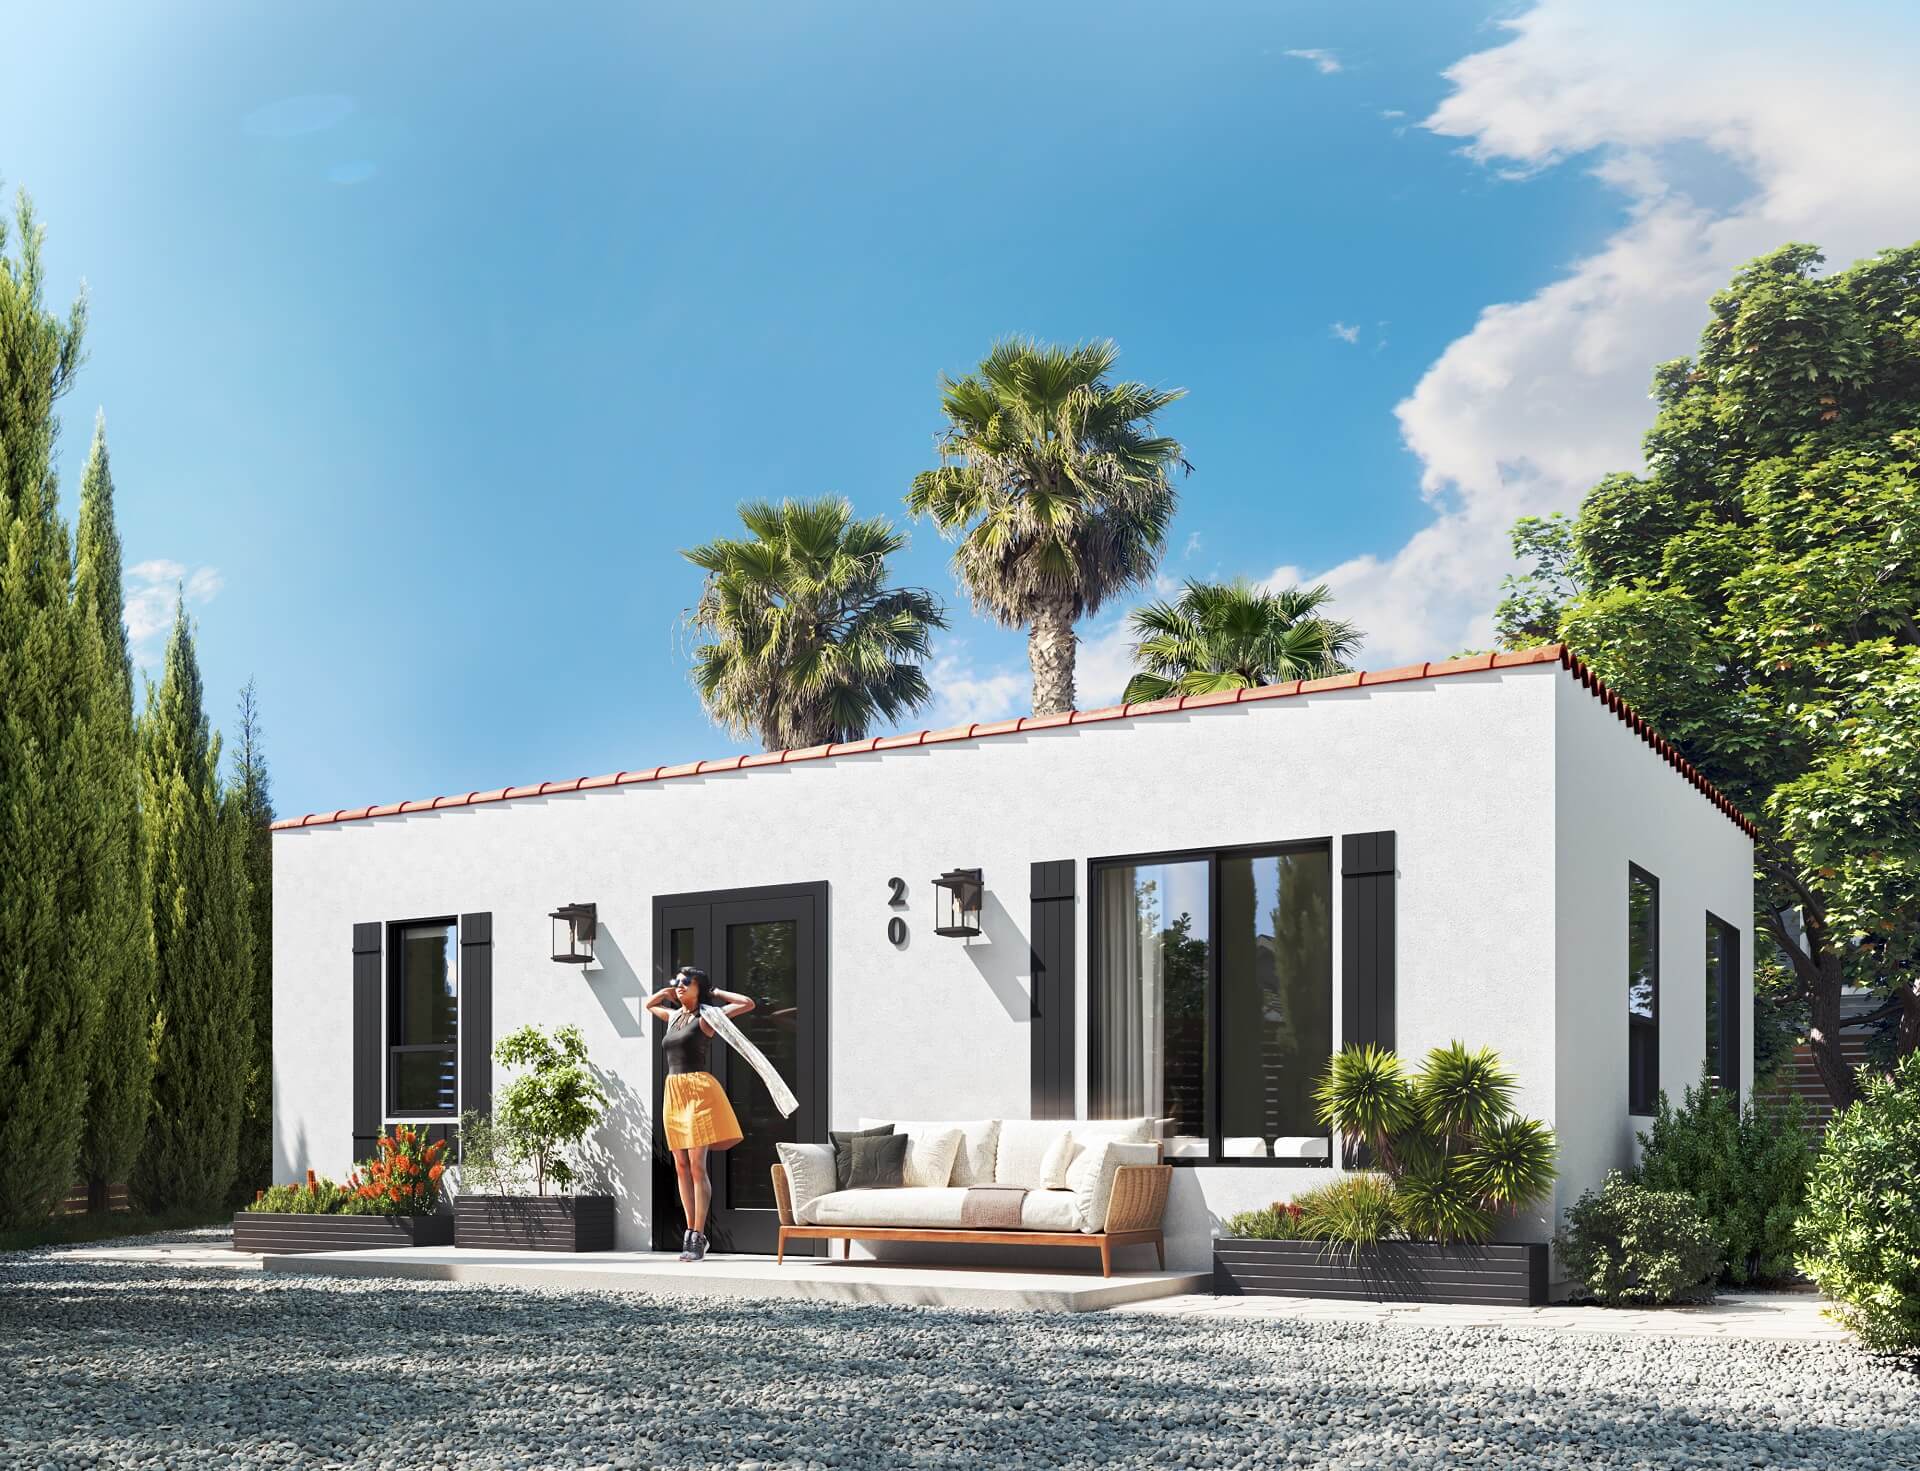 3D Renderings for Los Angeles Spanish-style Bungalow with a Character Model